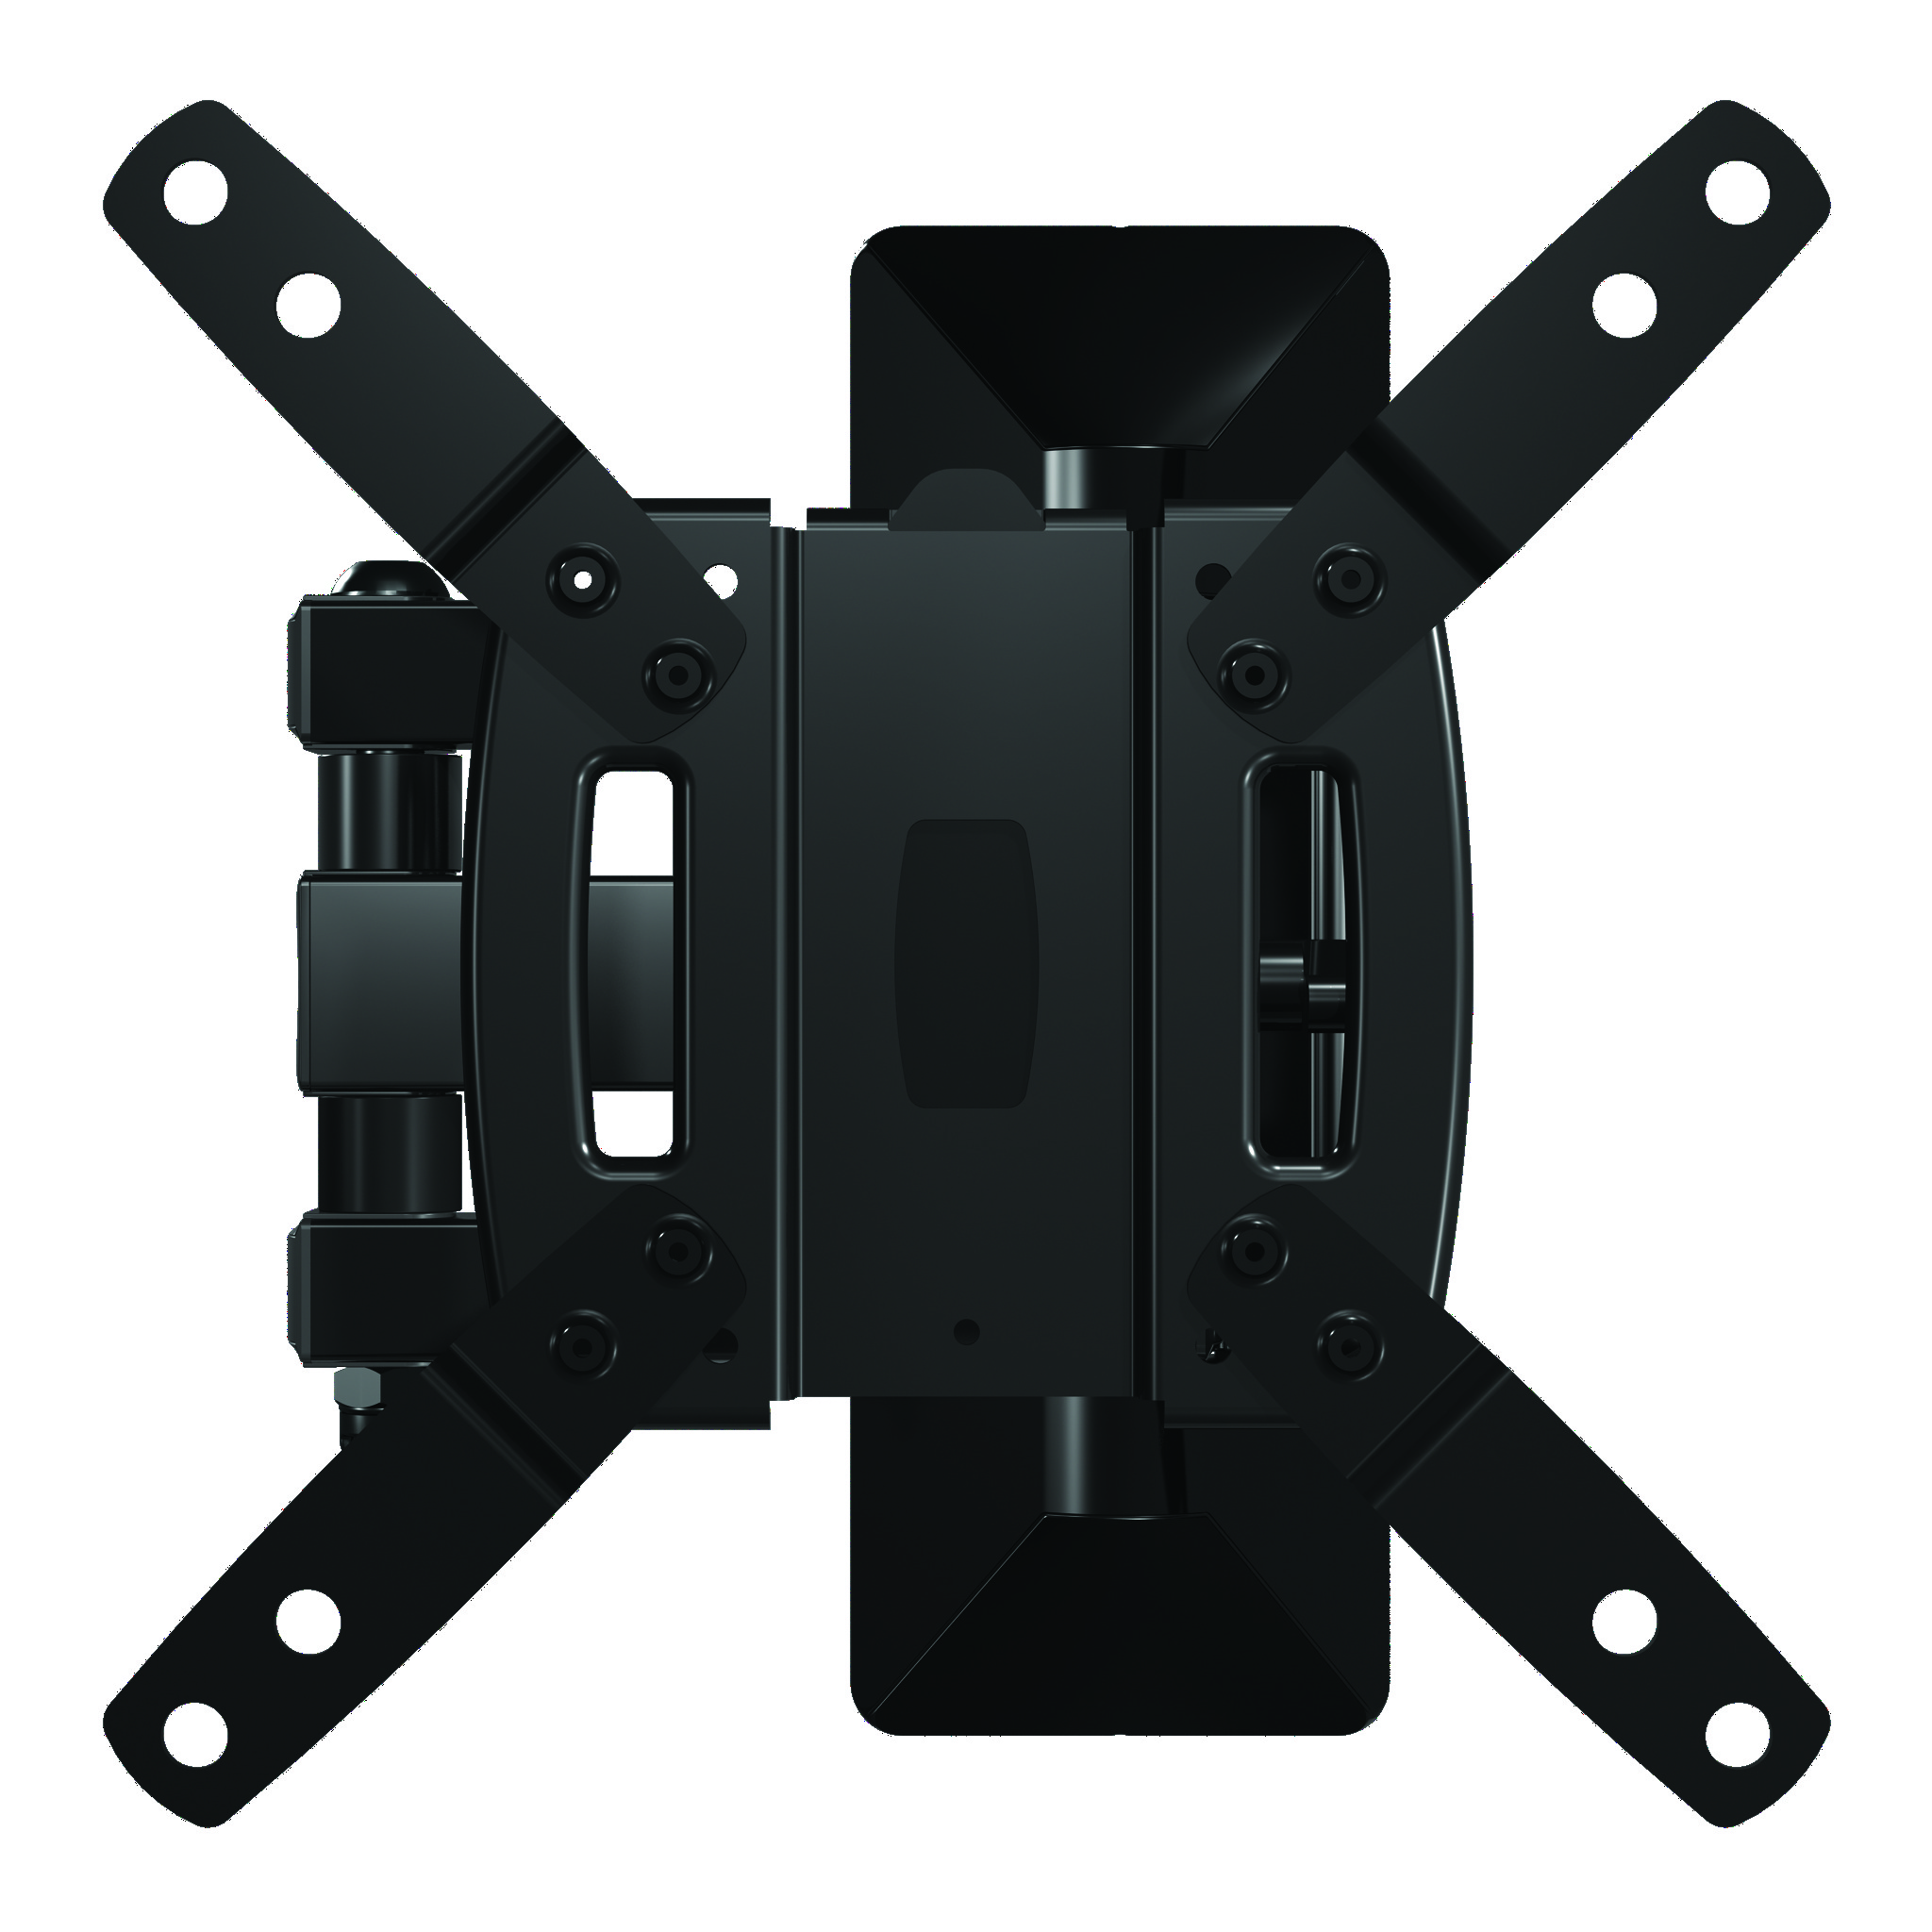 SANUS Vuepoint Full-Motion TV Mount for TVs 13"-40" up to 50lbs Comes with 6' 4K HDMI cable Tilts, Swivels and Extends 10" from the Wall - FSF110KIT - image 5 of 6